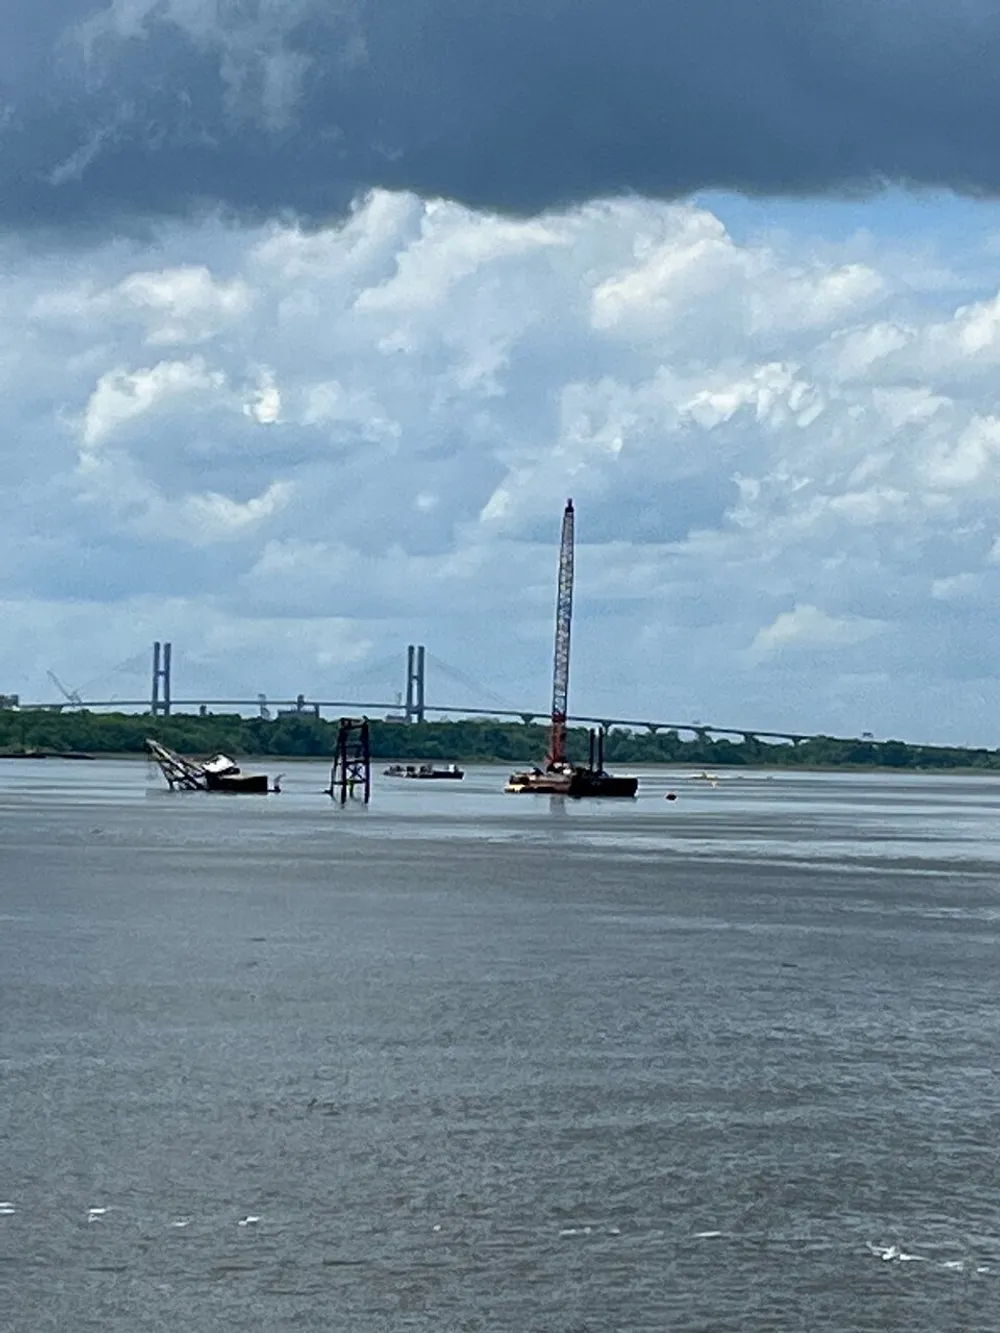 The image shows a body of water with machinery and a structure resembling a crane under a sky with a mix of clouds and blue patches and a faintly visible bridge in the distant background